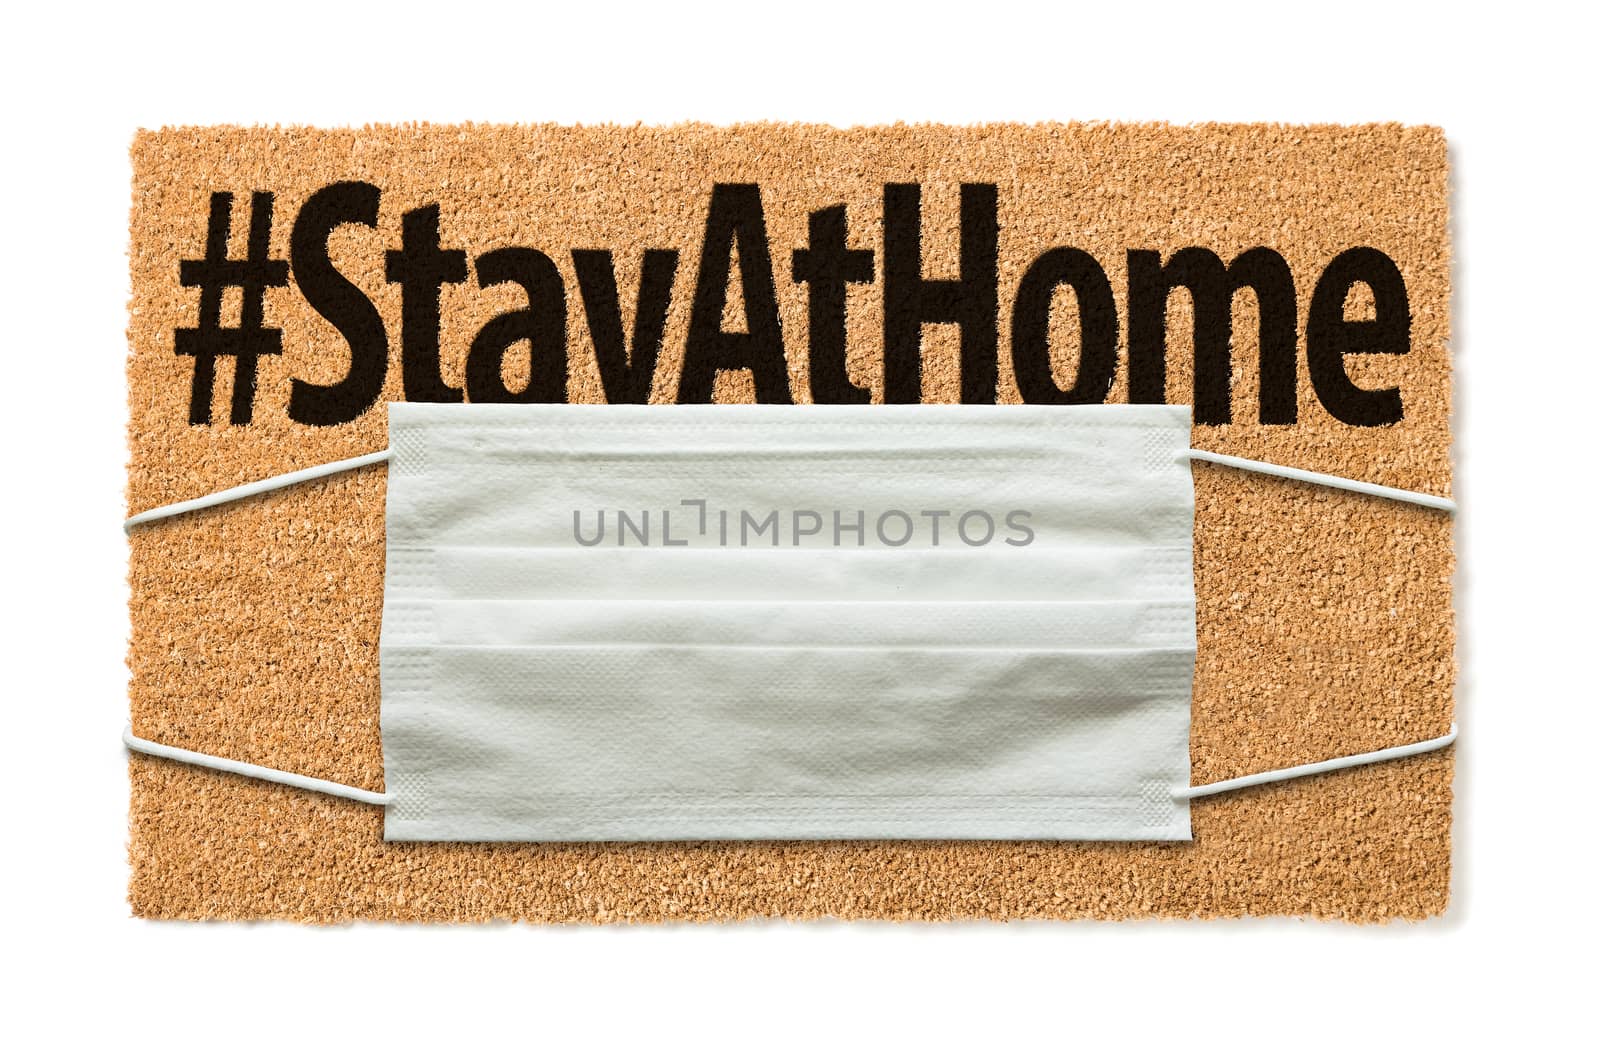 Welcome Mat With Medical Face Mask and #Stay At Home Text Isolat by Feverpitched